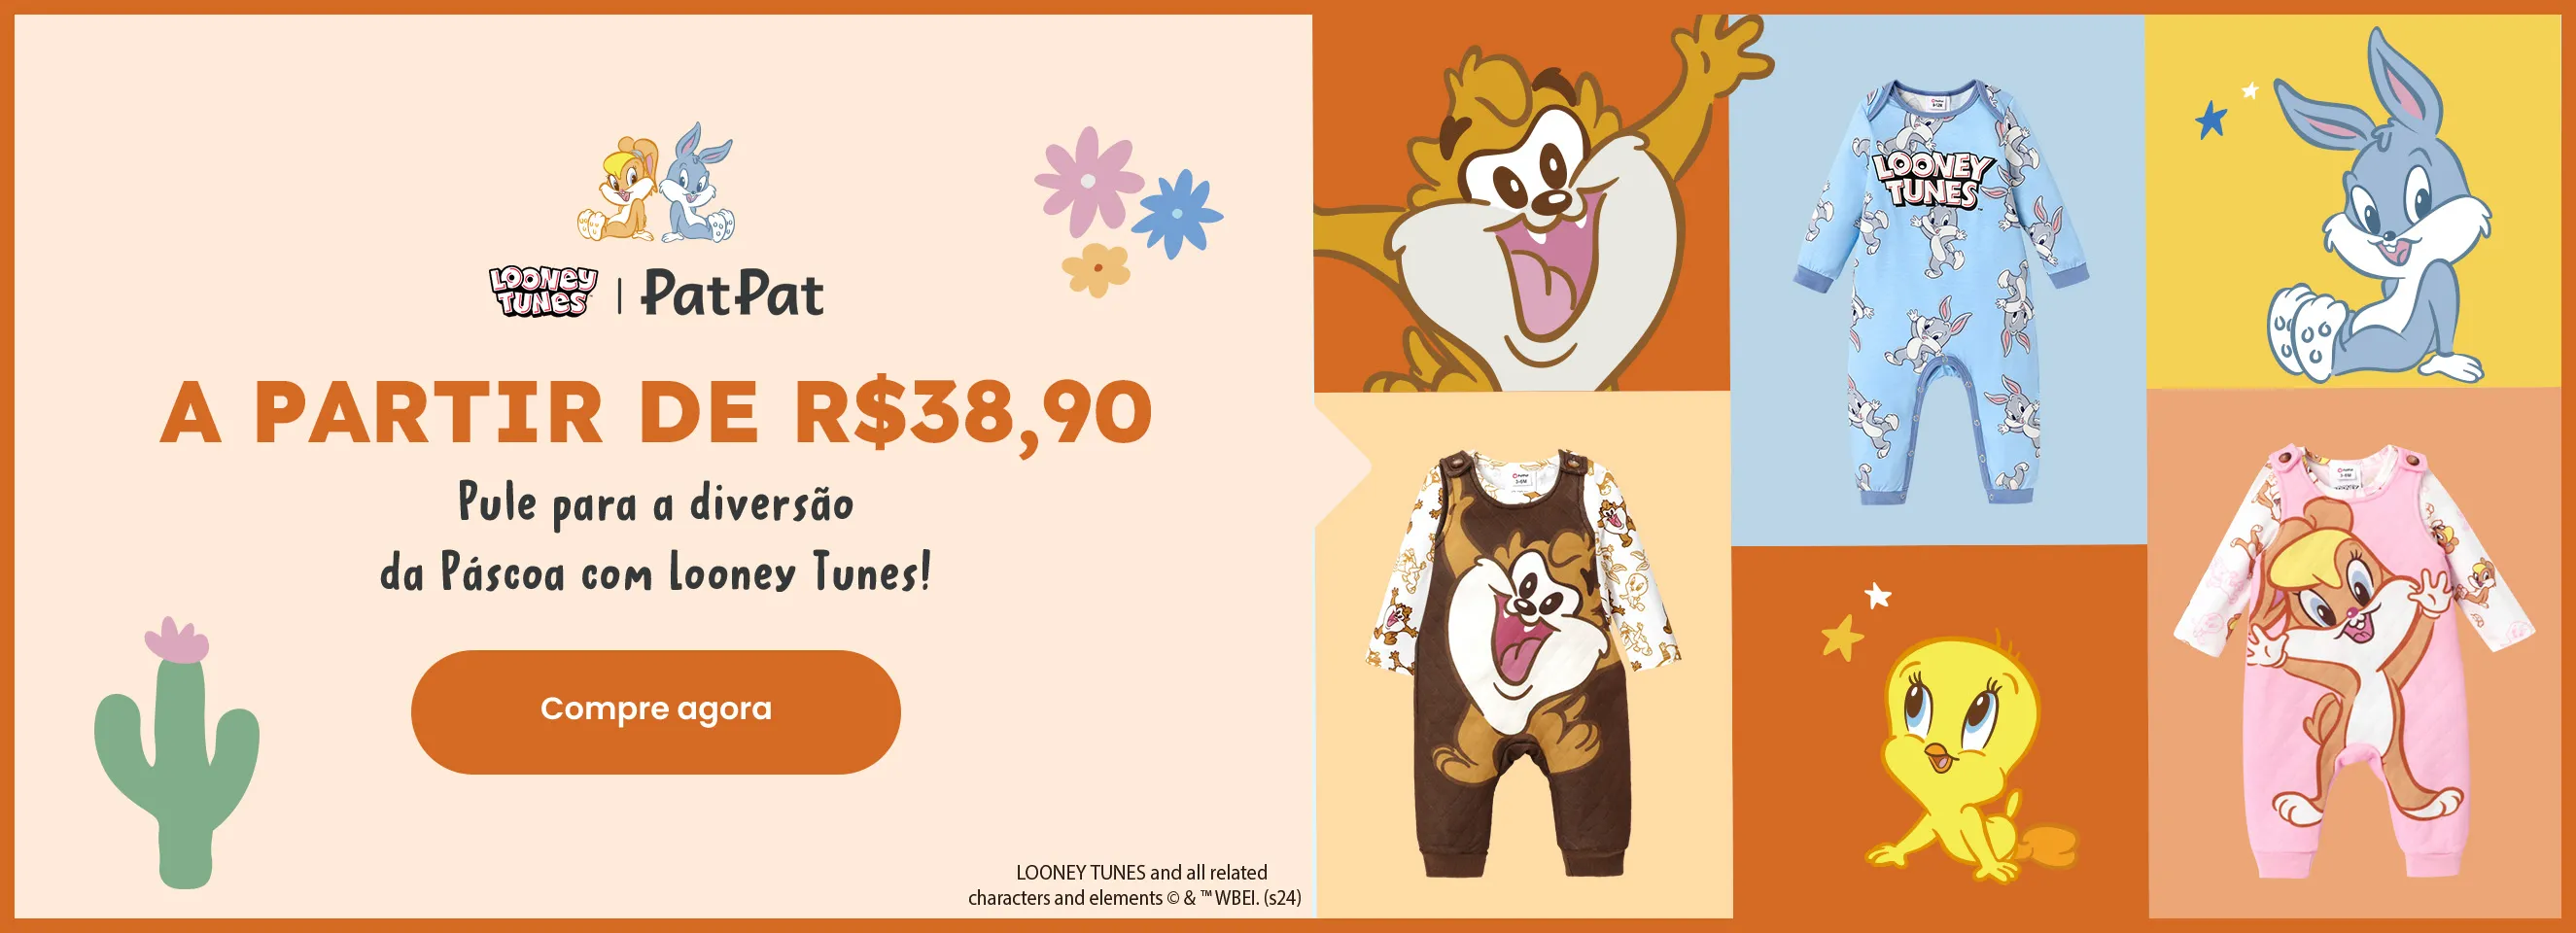 Click it to join Easter with Looney Tunes activity